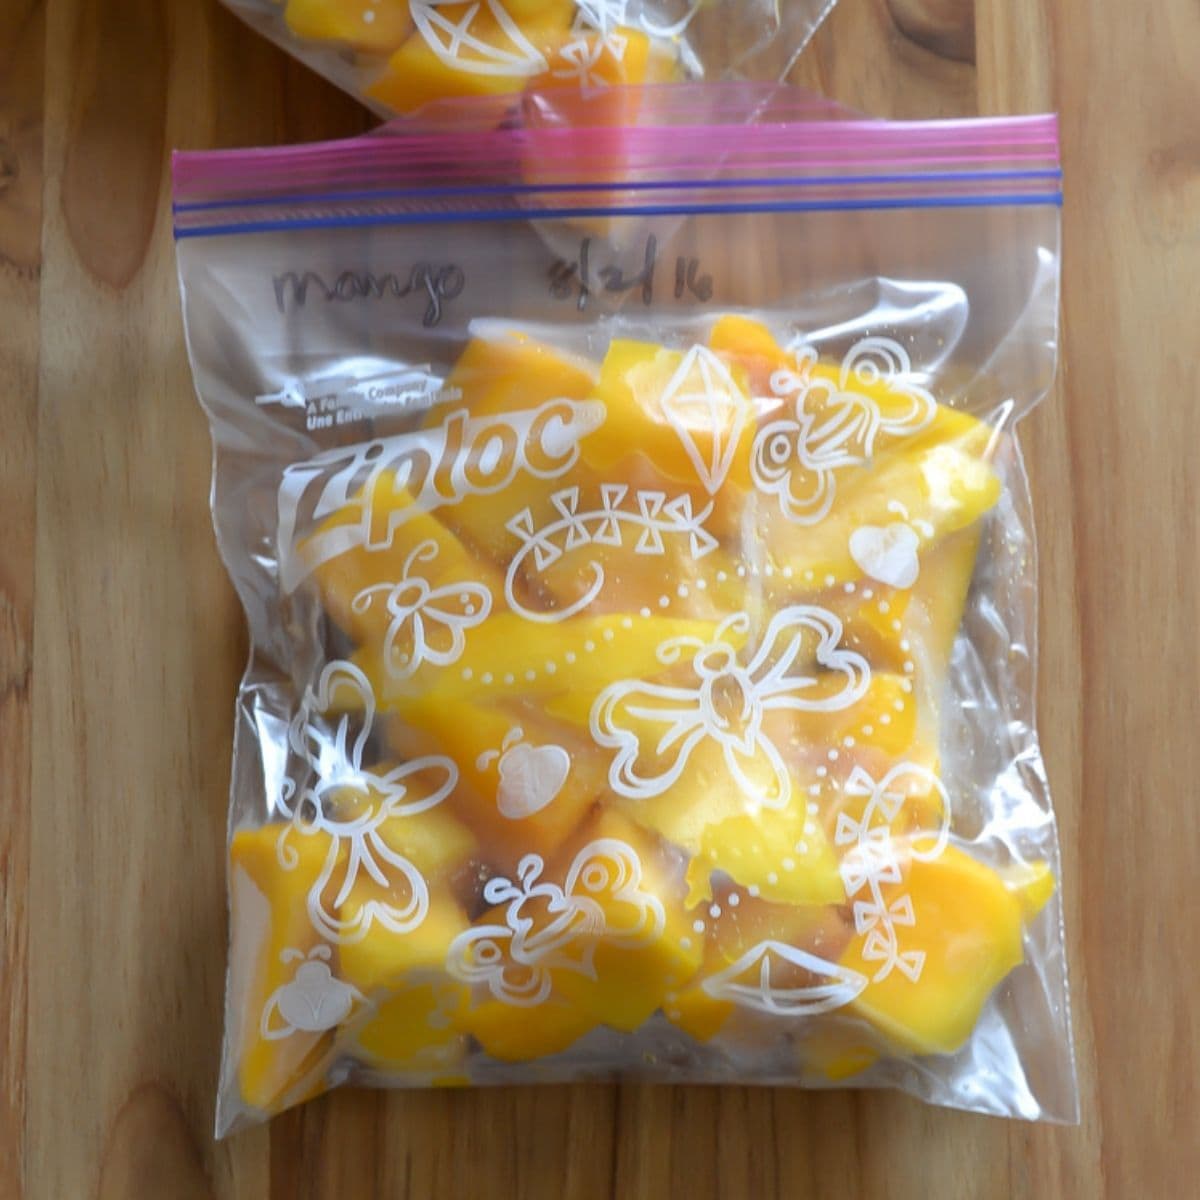 Cubed mango pieces in a freezer bag on a cutting board.